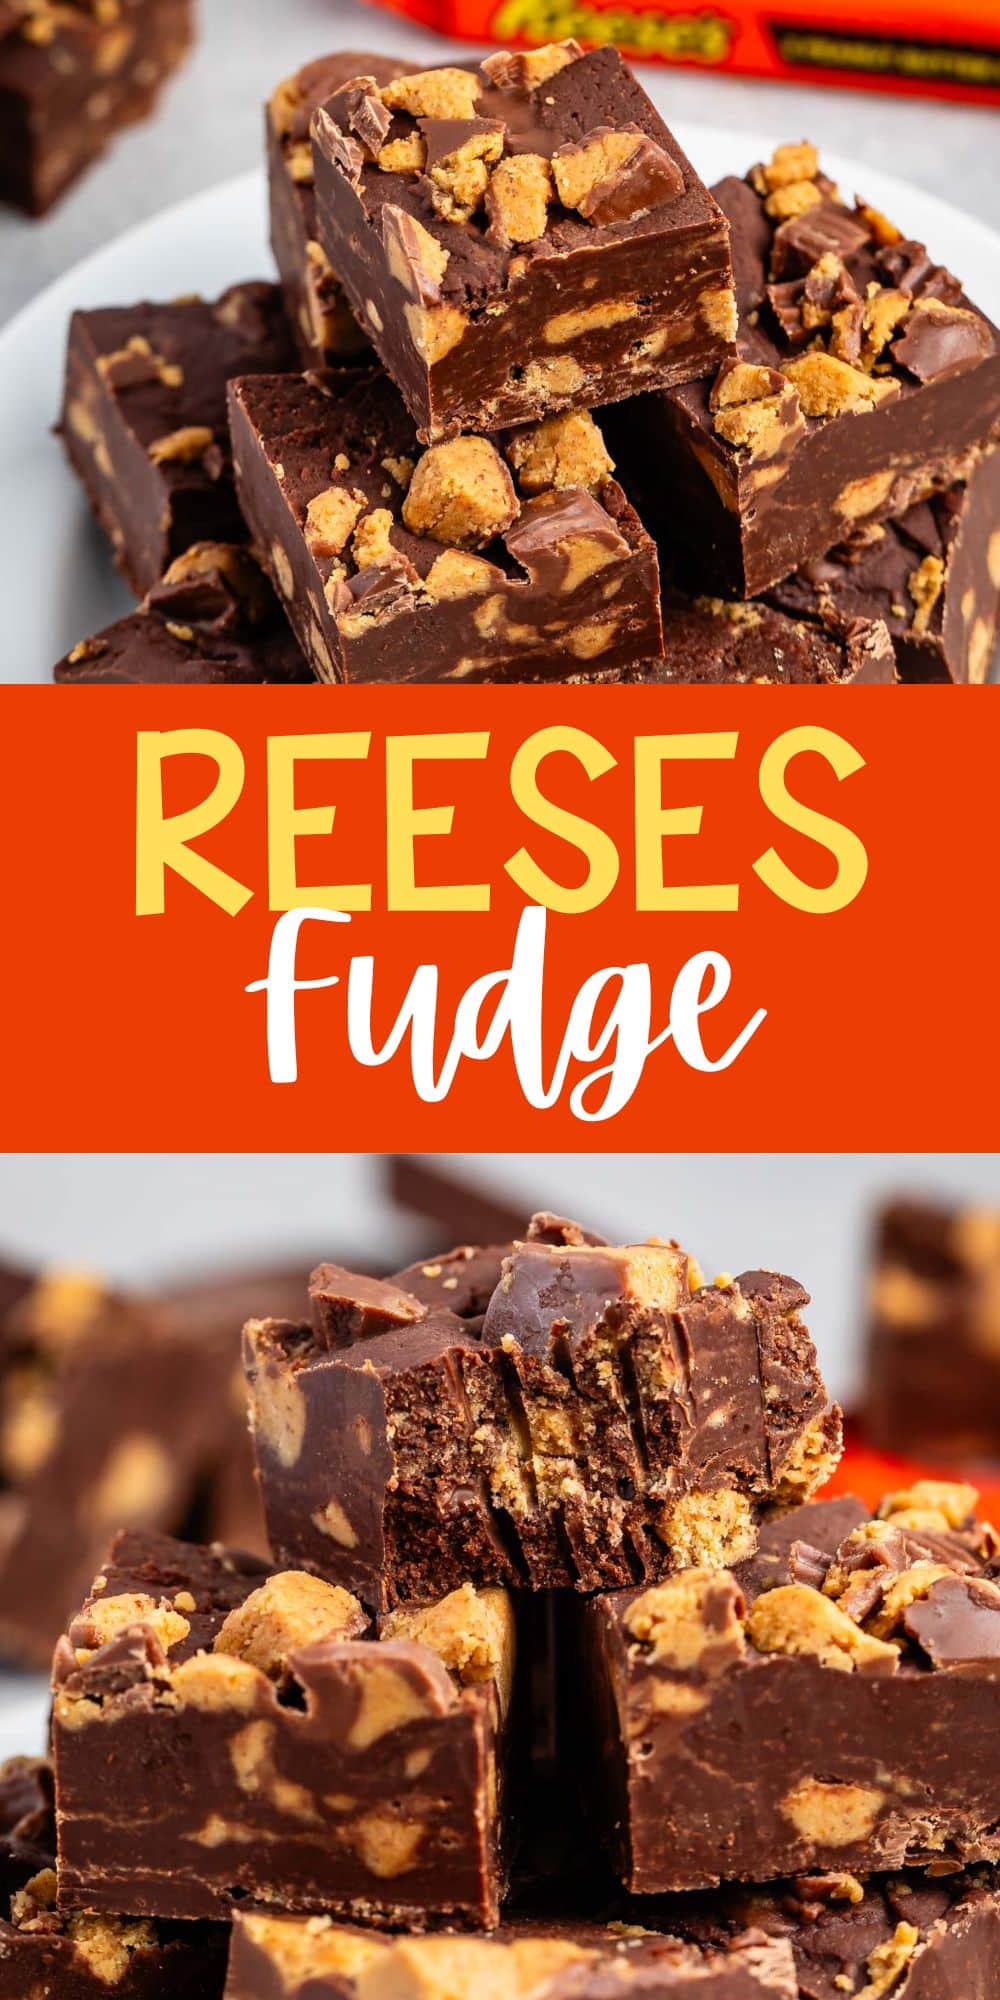 two photos of stacked brown reeses fudge on a white plate with words on the image.